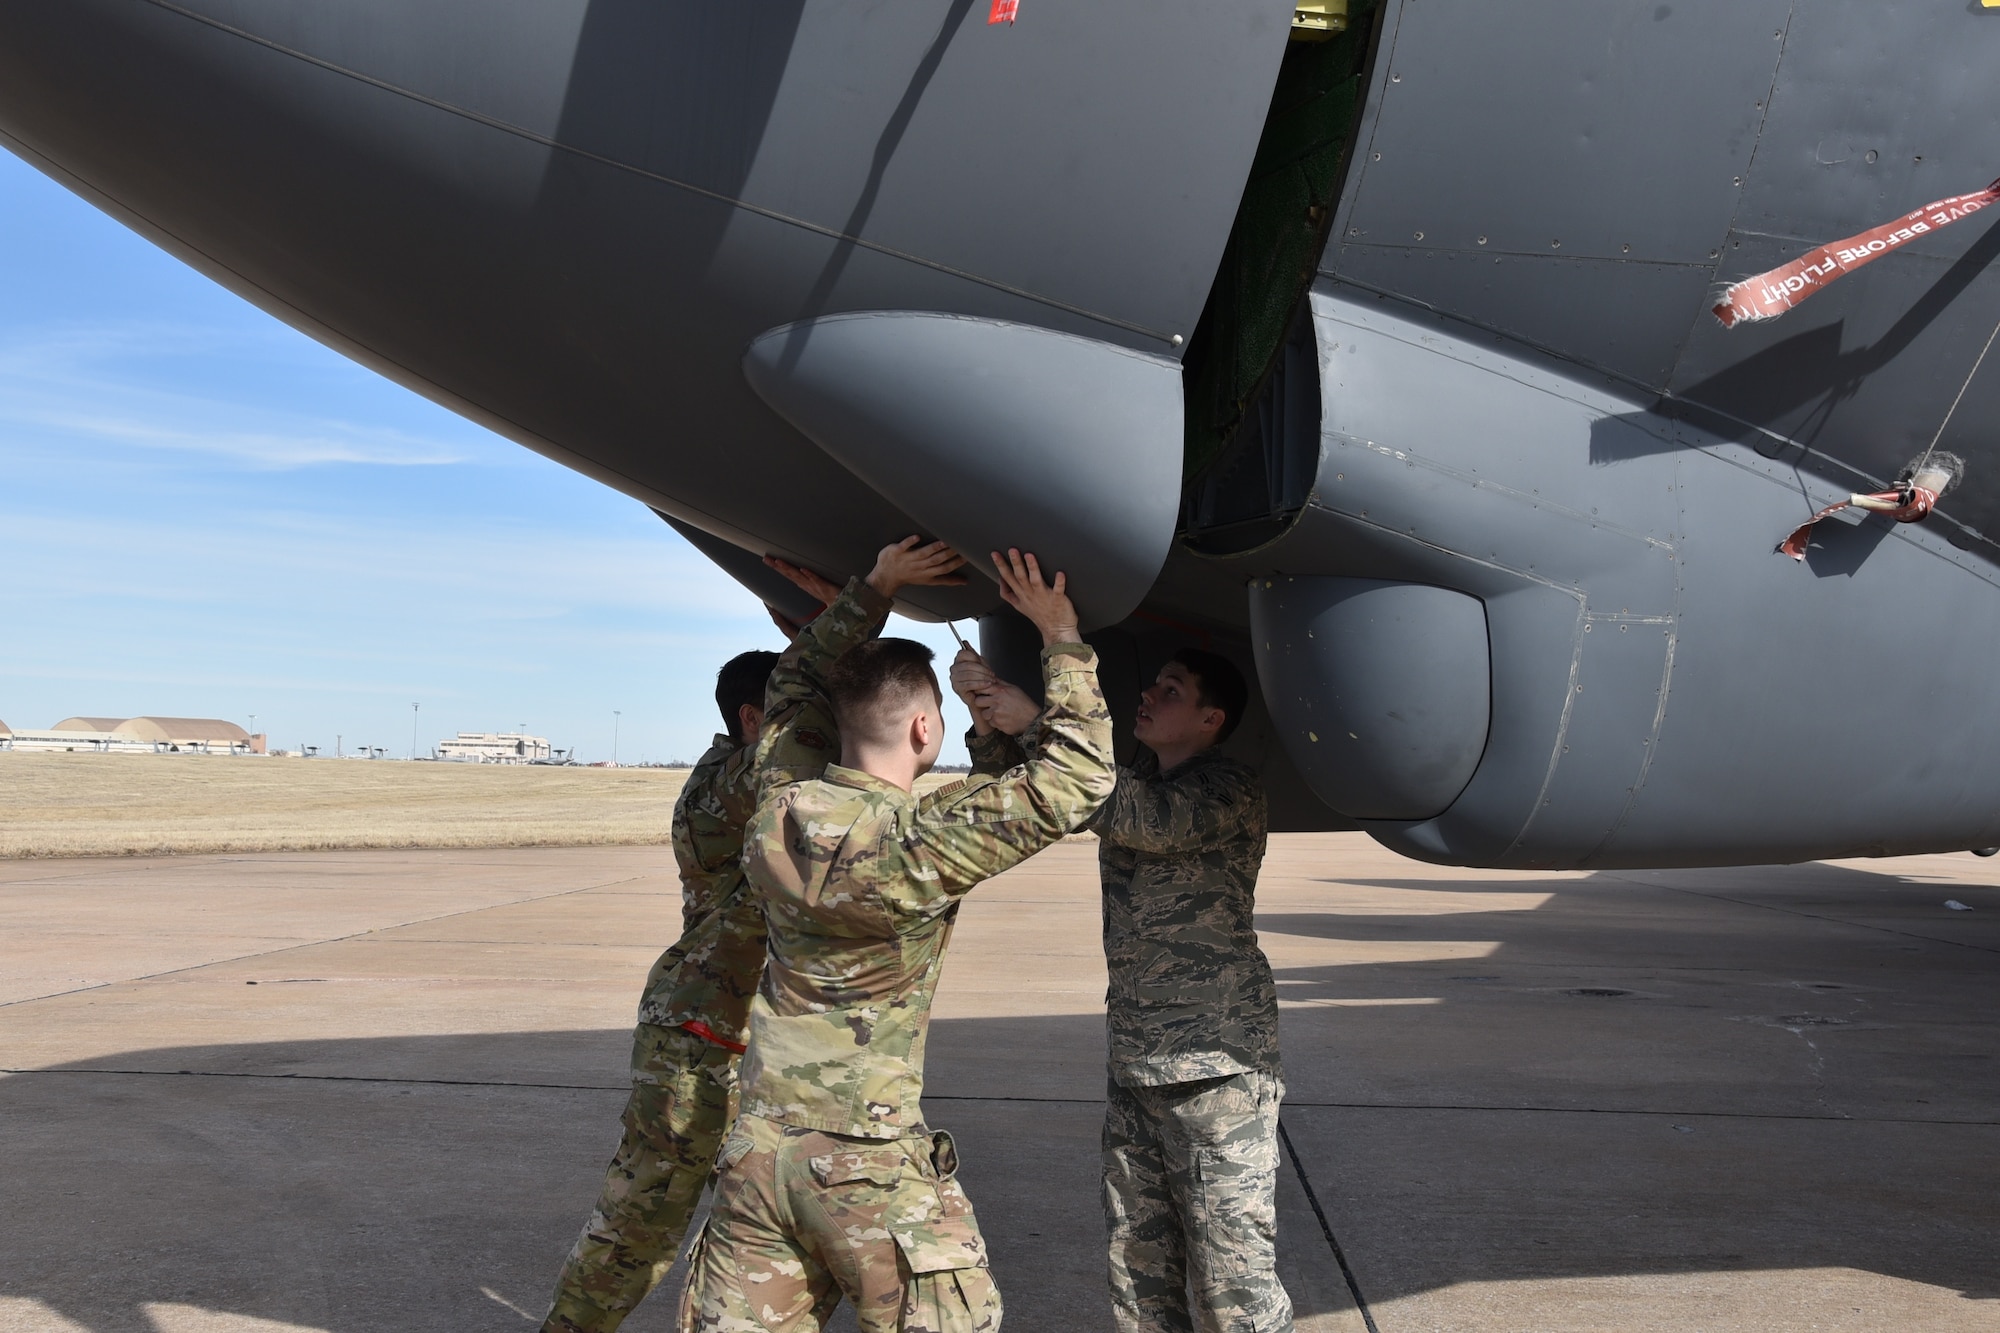 From left, Airman 1st Class Dominik Sticha, Staff Sgt. Derrick Ewing and Staff Sgt. Dylan Tuckett, maintainers with the 5th Aircraft Maintenance Squadron, Minot Air Force Base, North Dakota, close a nose radome on a B-52H Stratofortress bomber from the 2nd Bomb Wing, Barksdale AFB, Louisiana, on Jan. 27.   The aircraft is undergoing electromagnetic pulse hardness testing at the Compass Rose facility here. (U.S. Air Force photo/Ron Mullan)